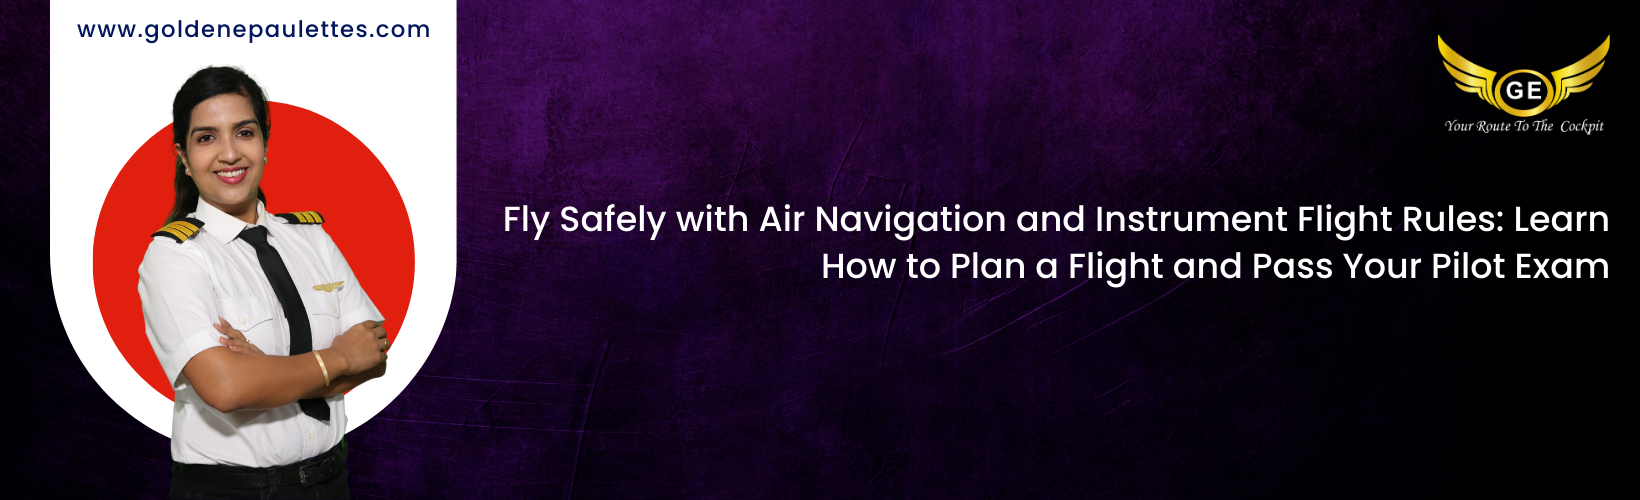 Air Navigation and Instrument Flight Rules